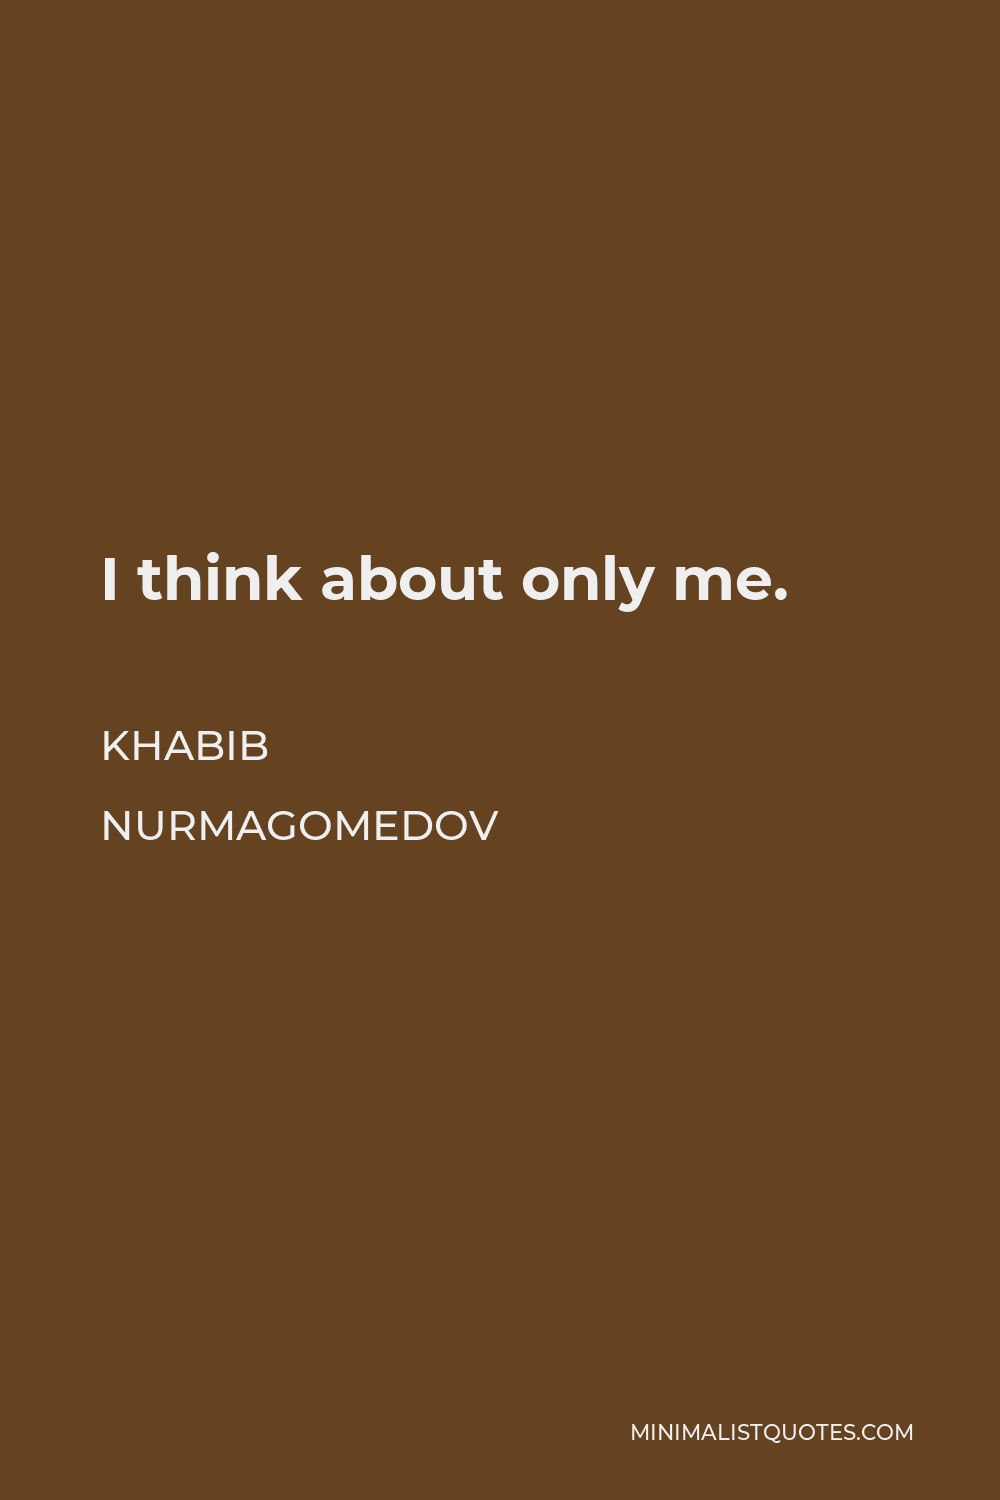 Khabib Nurmagomedov Quote - I think about only me.